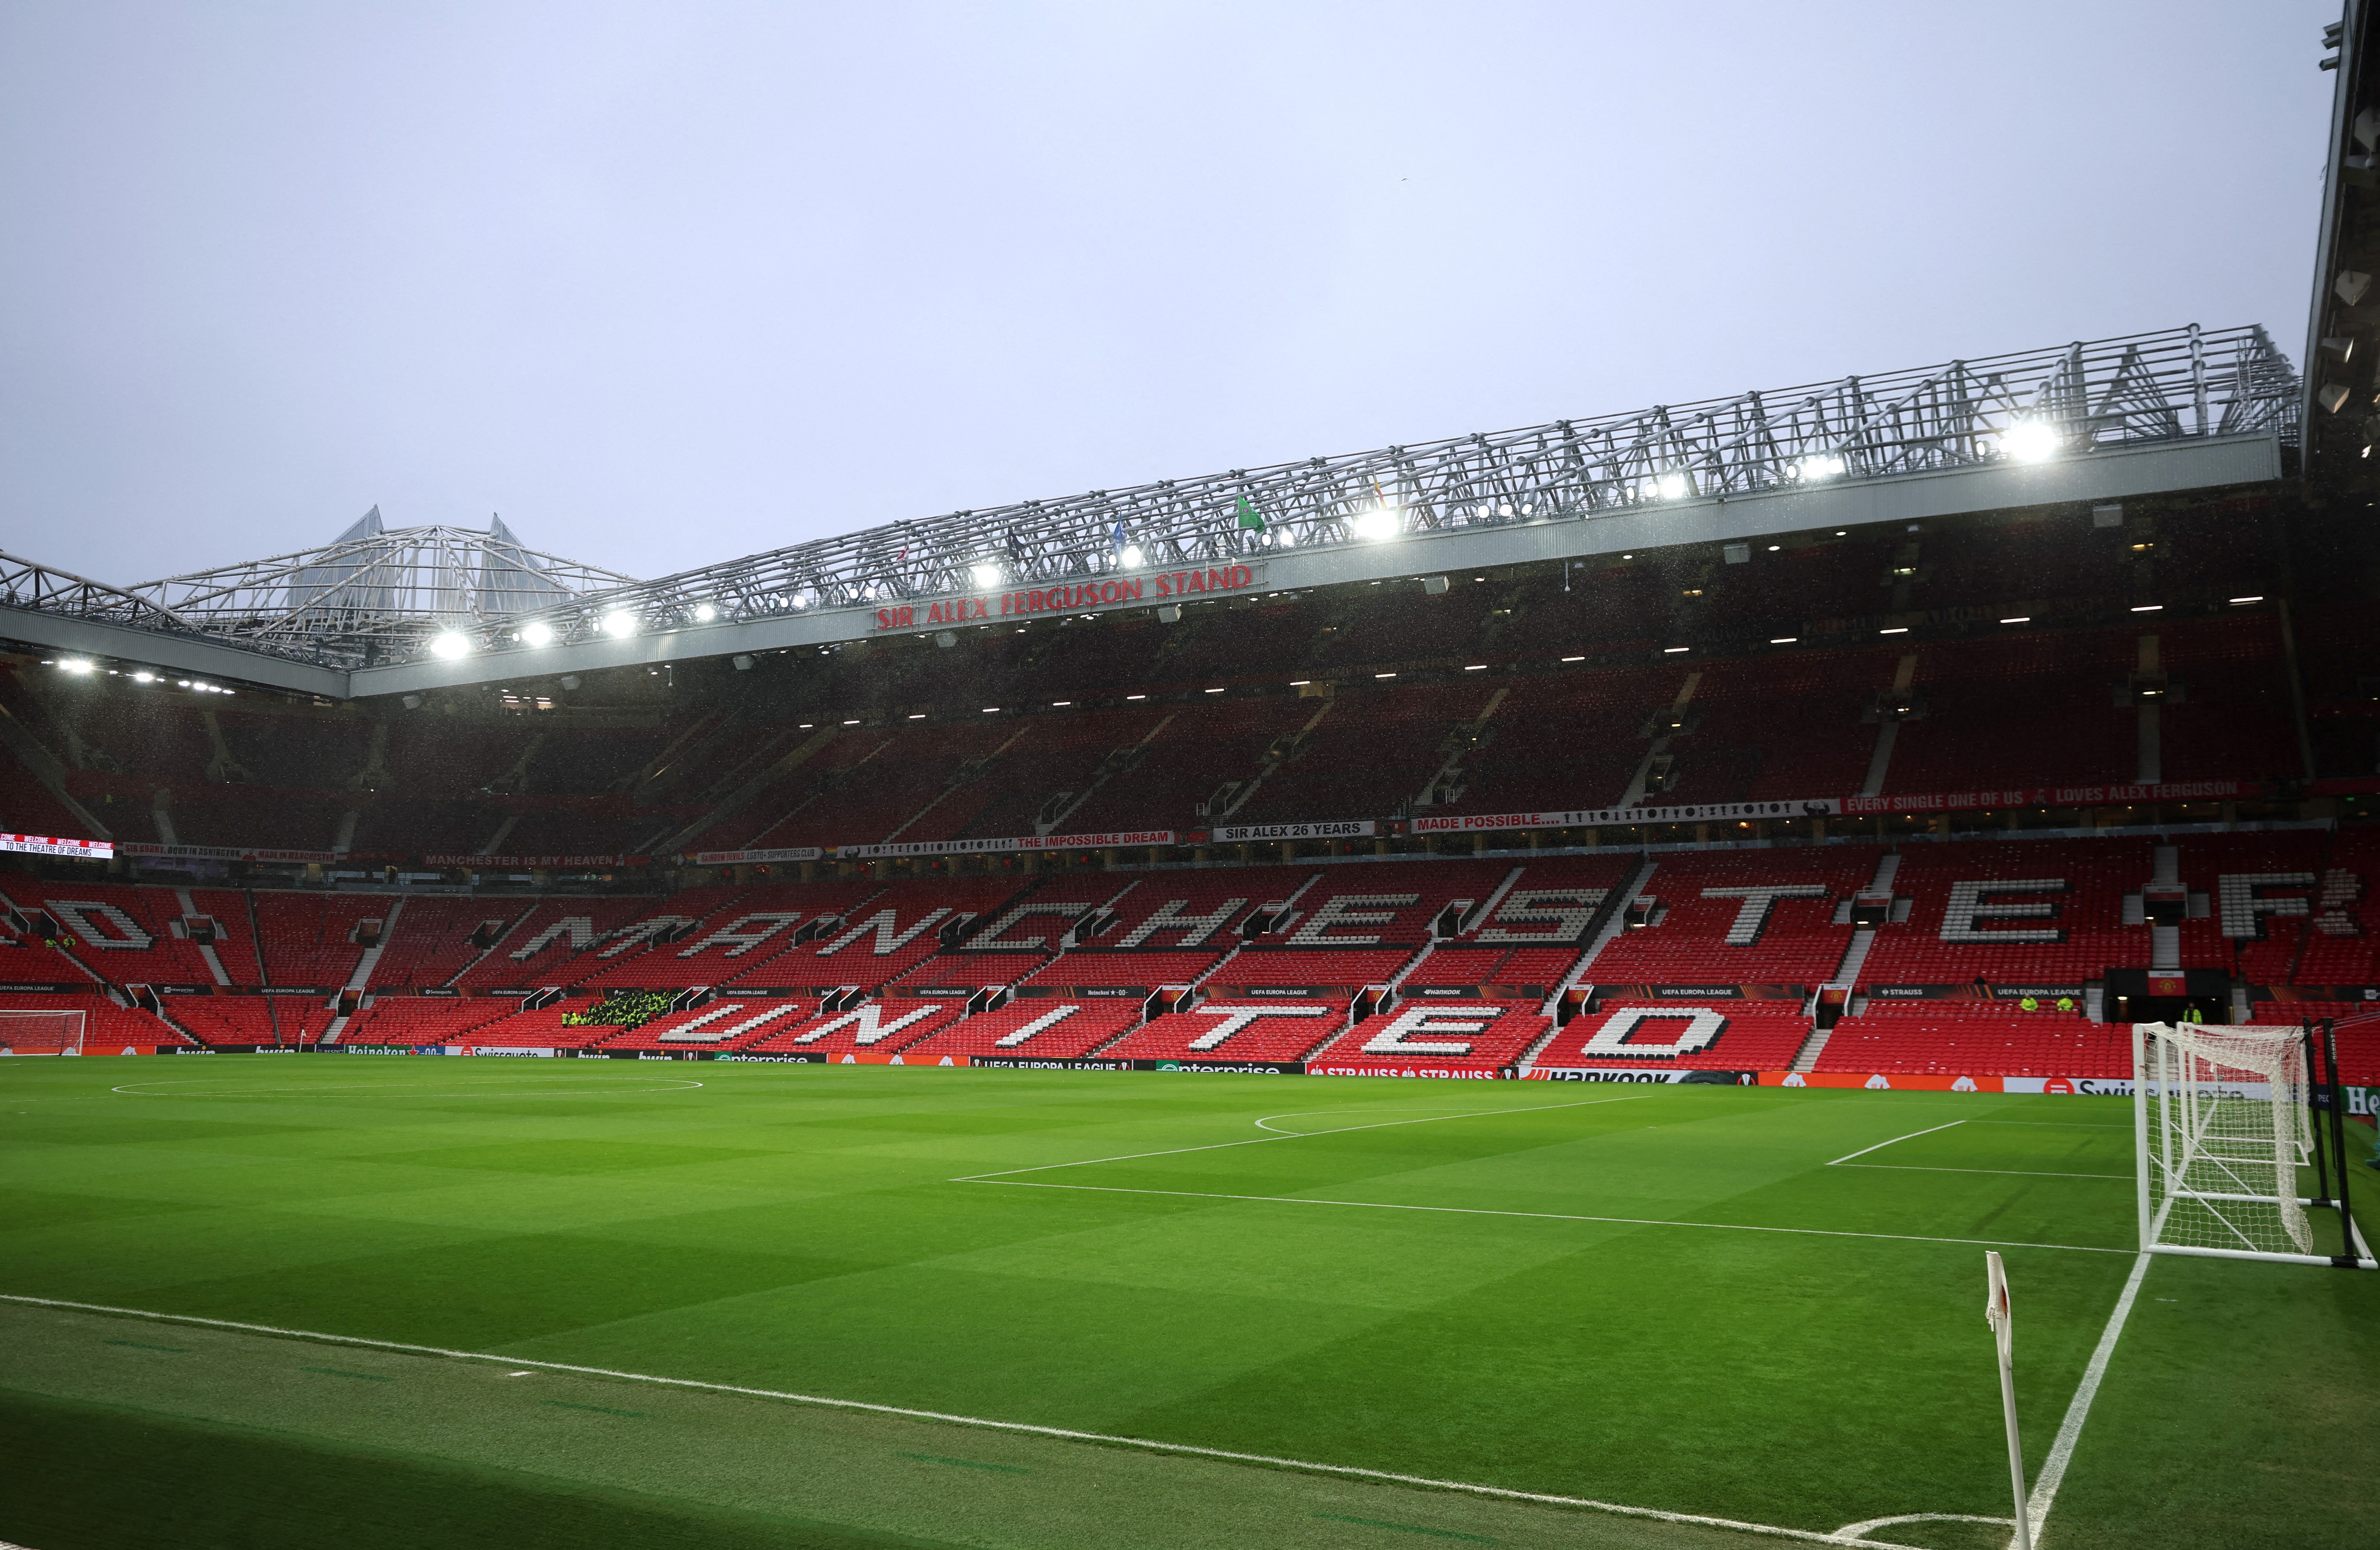 Europa League - Round of 16 - First Leg - Manchester United v Real Betis